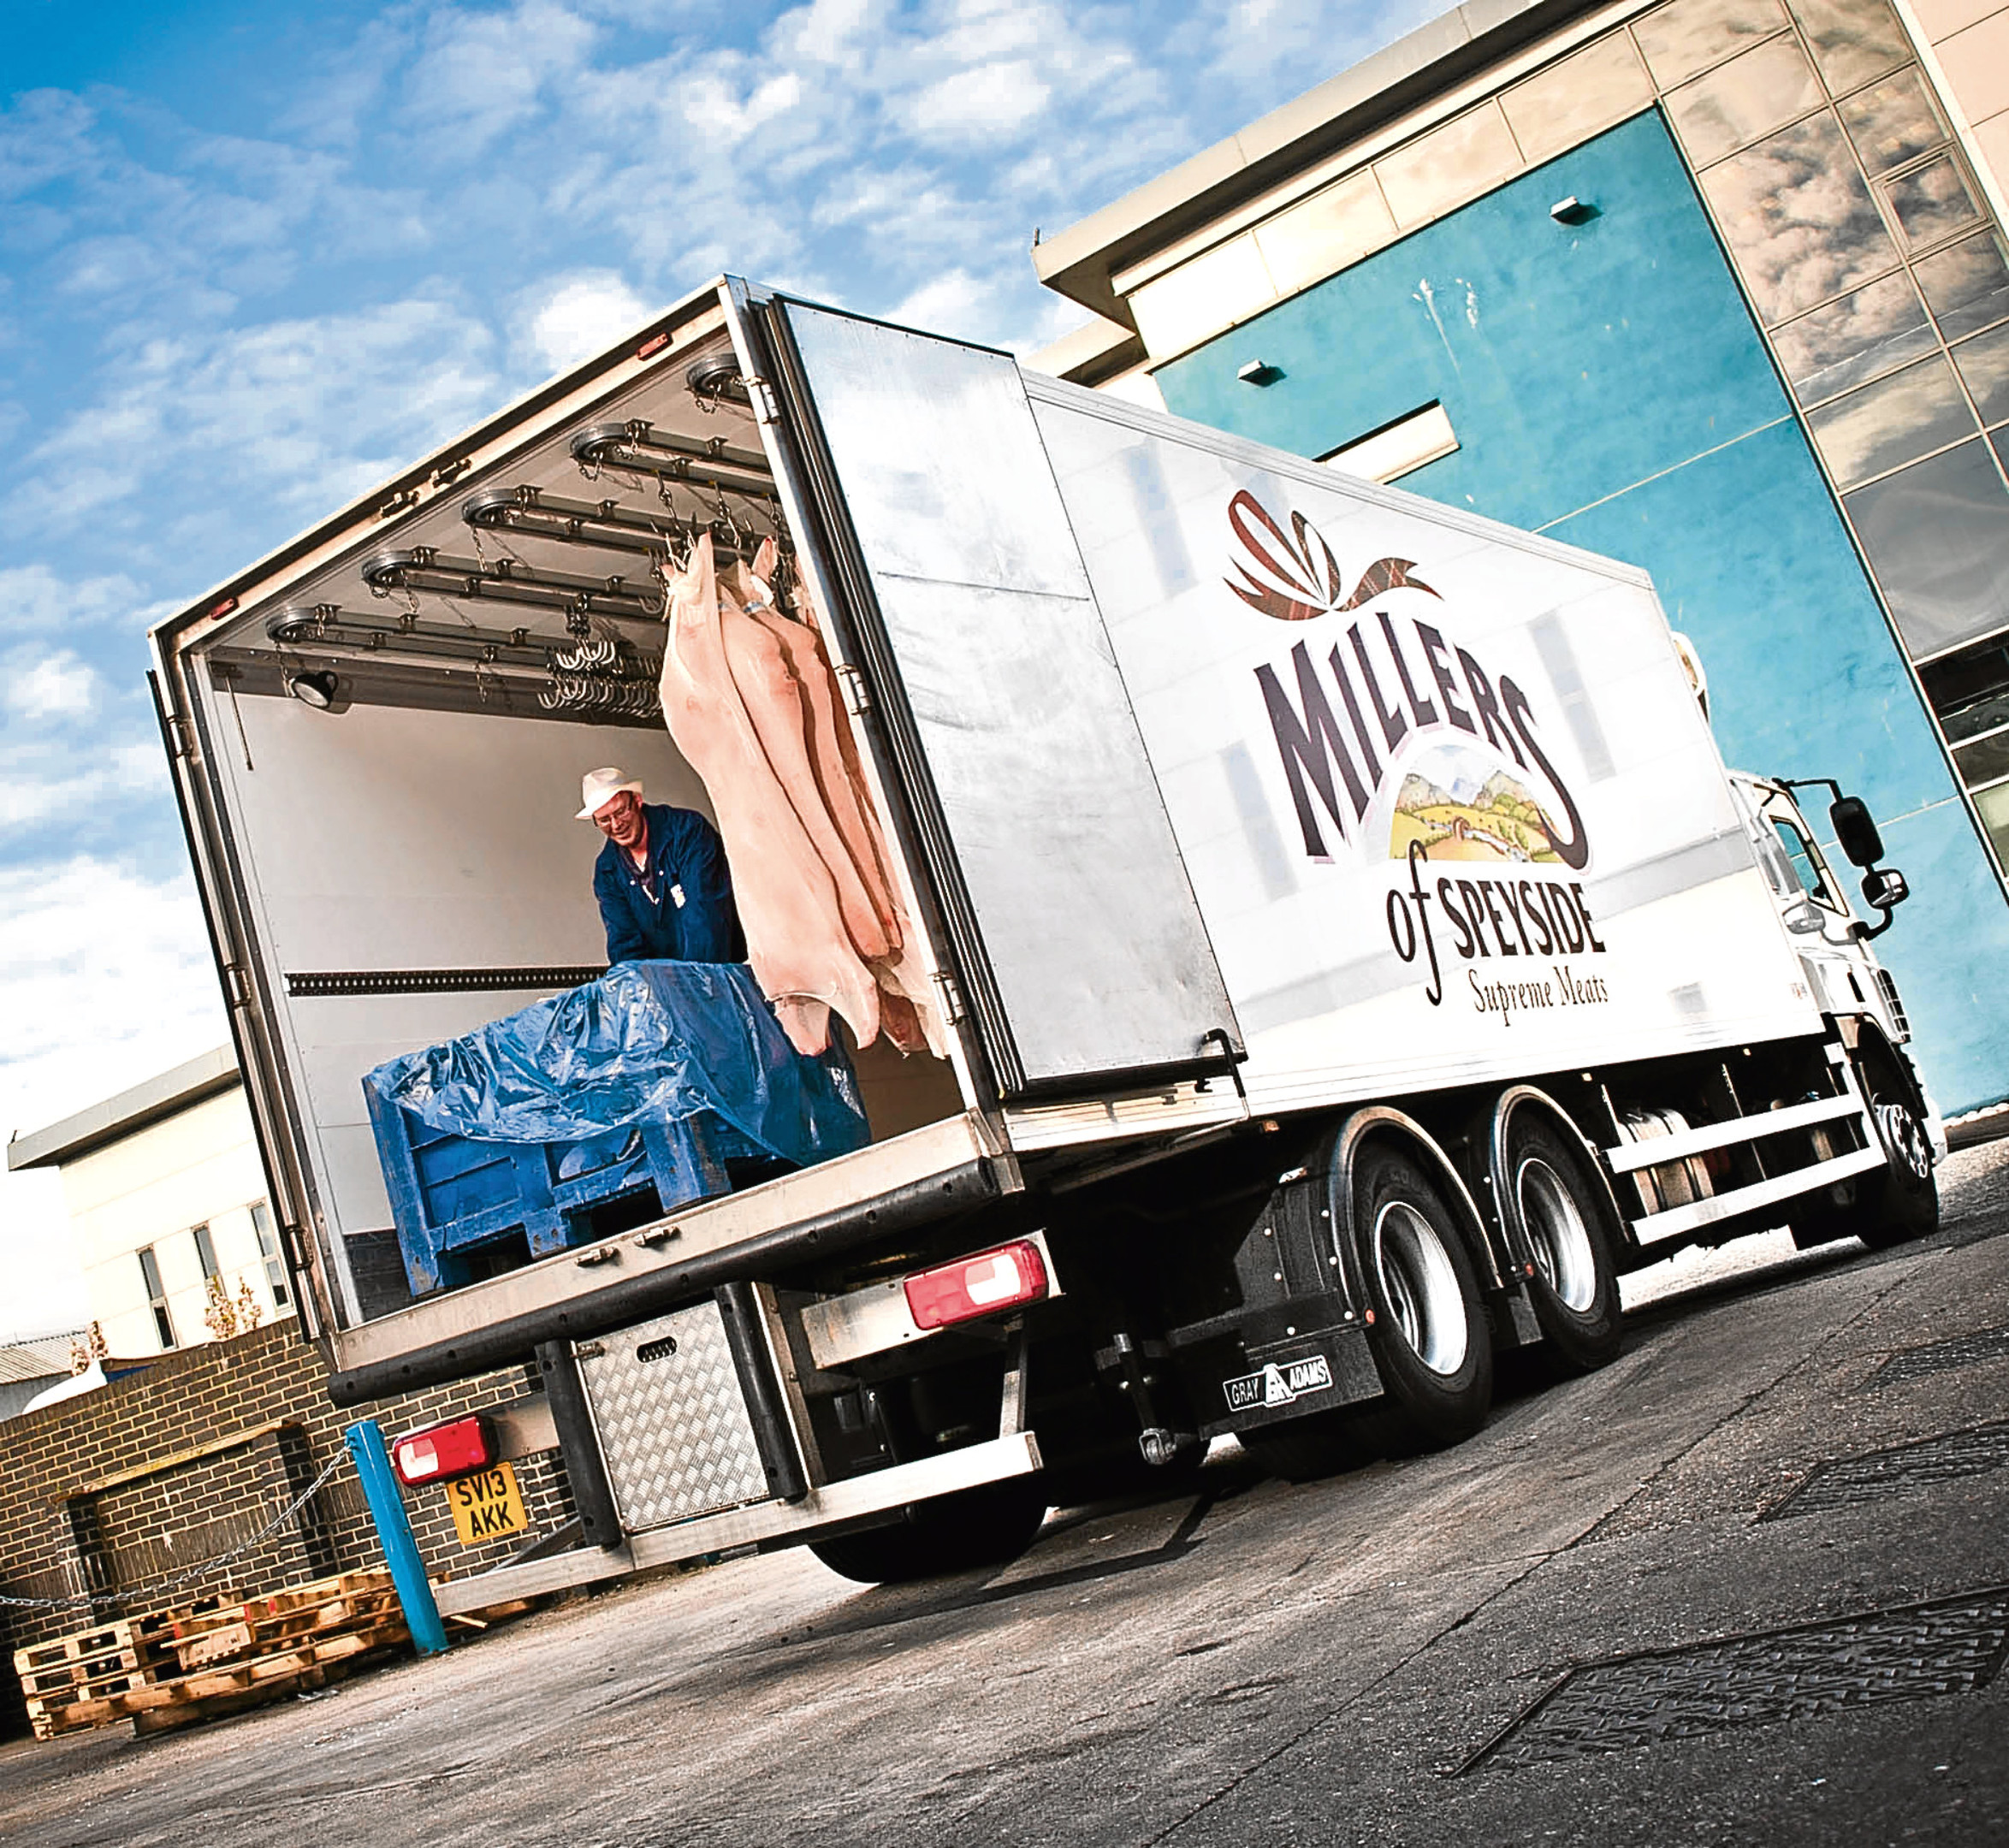 Fraserburgh firm Gray & Adams has supplied one of its refrigerated trailers for Millers of Speyside